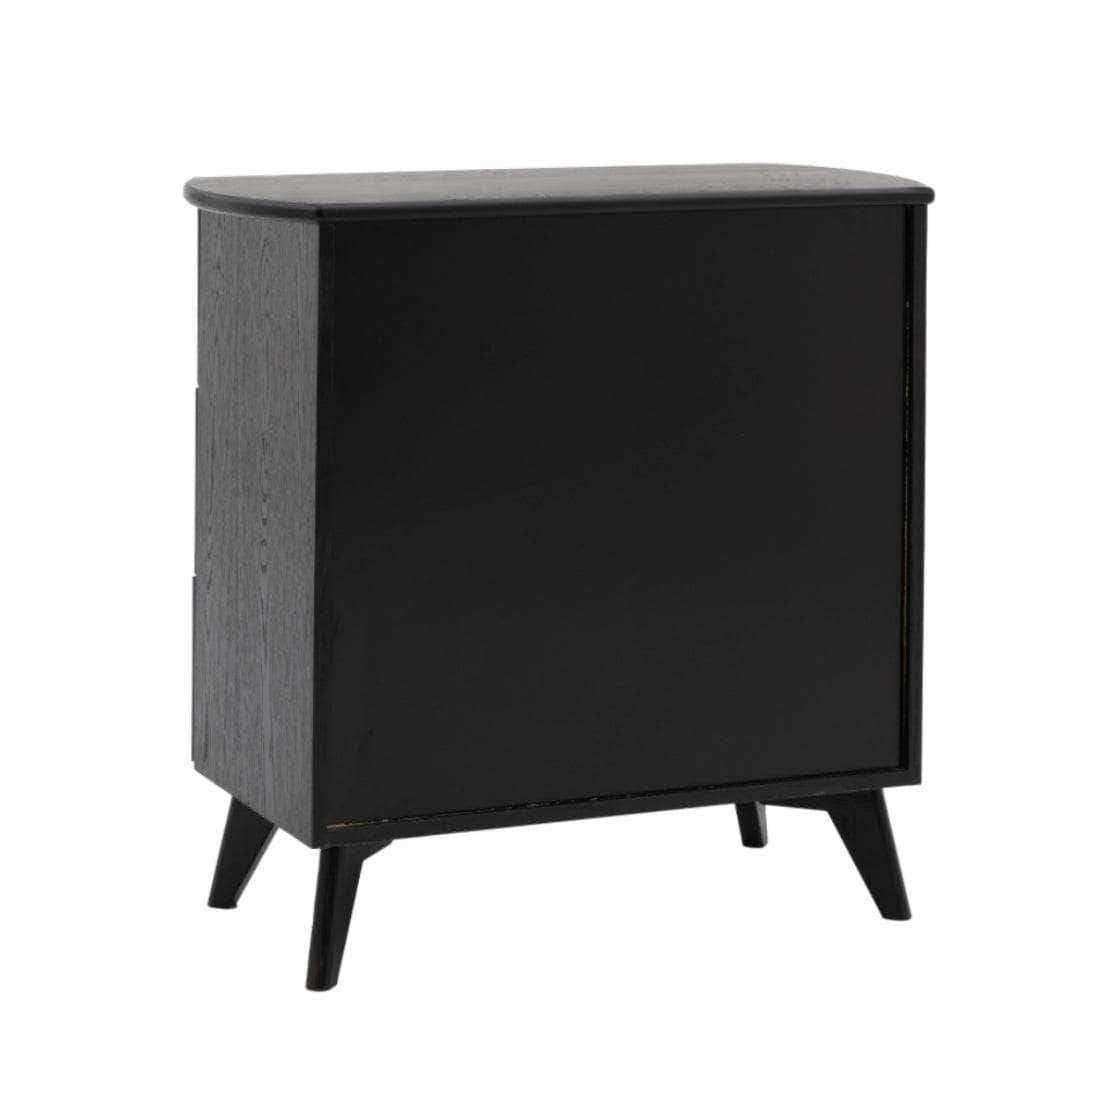 Rattan Fronted Black Art Deco Inspired Chest Of Drawers - The Farthing